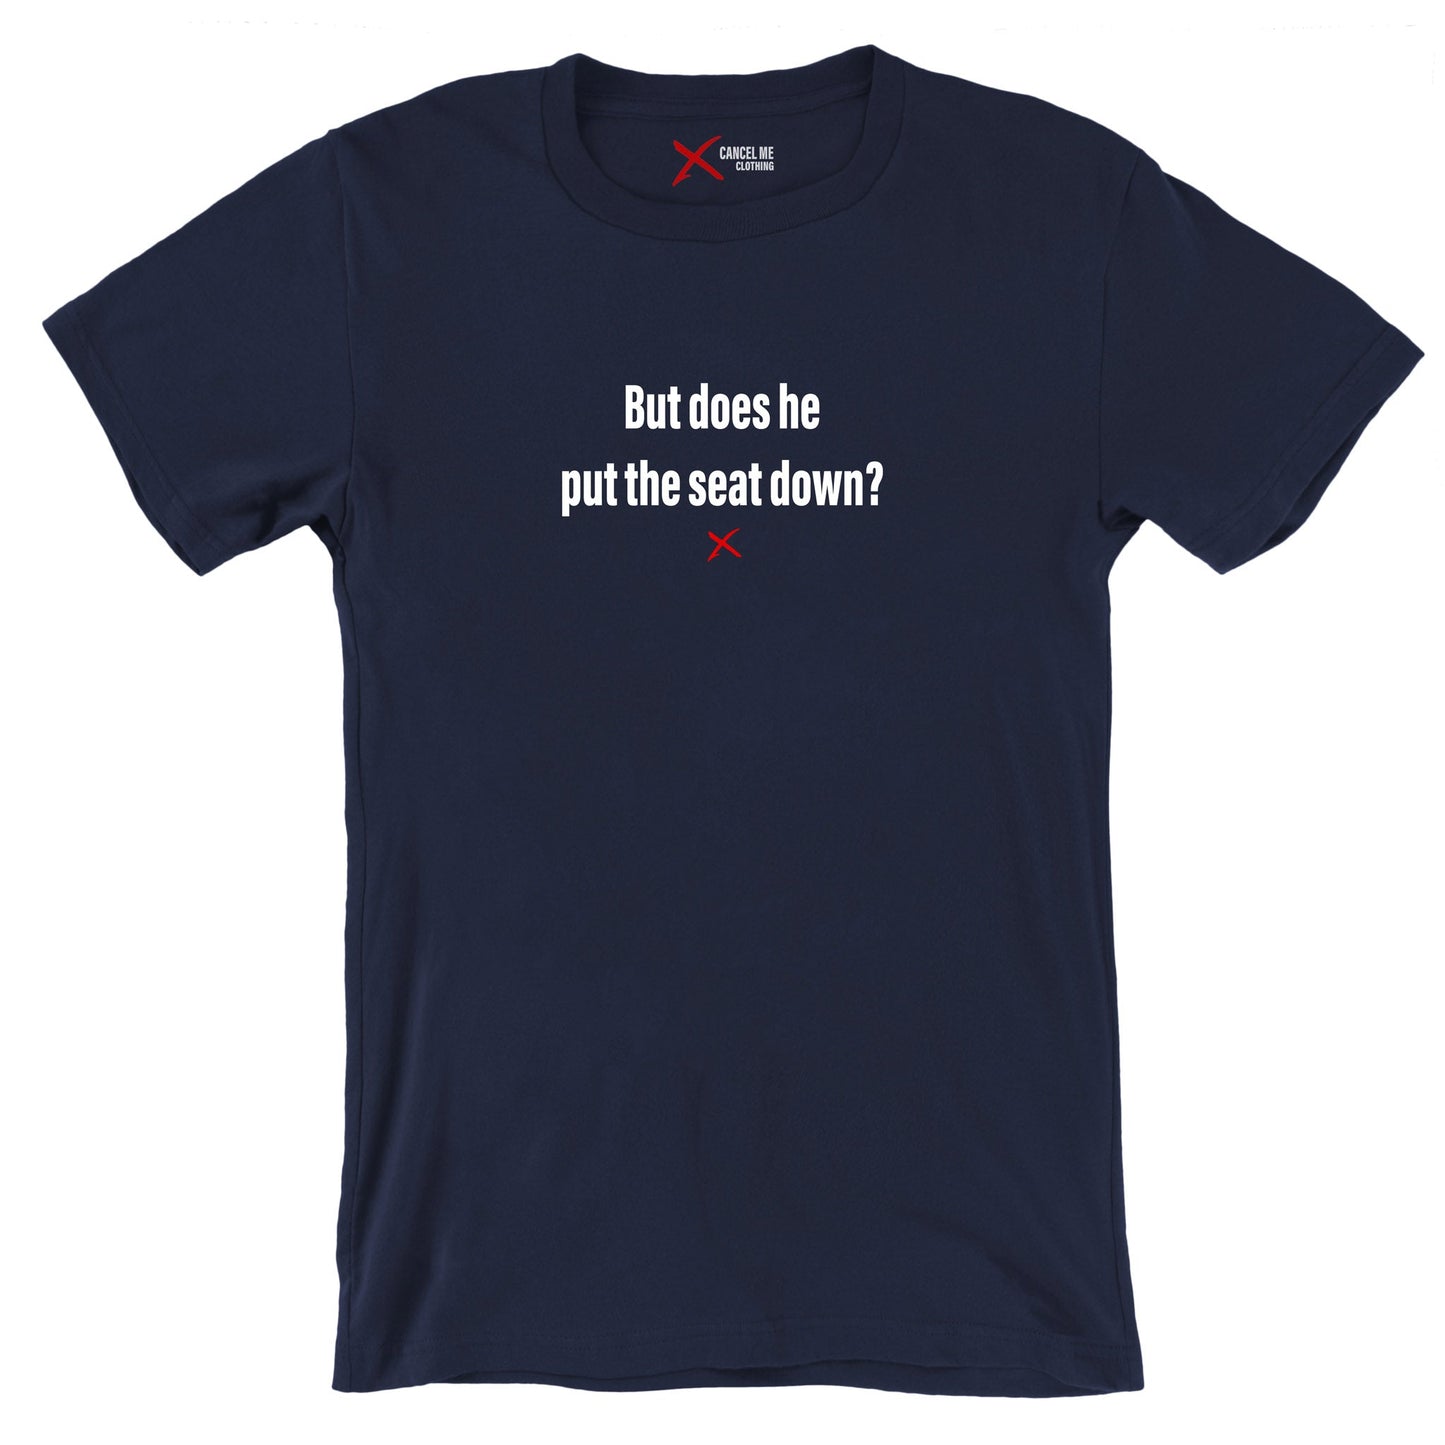 But does he put the seat down? - Shirt